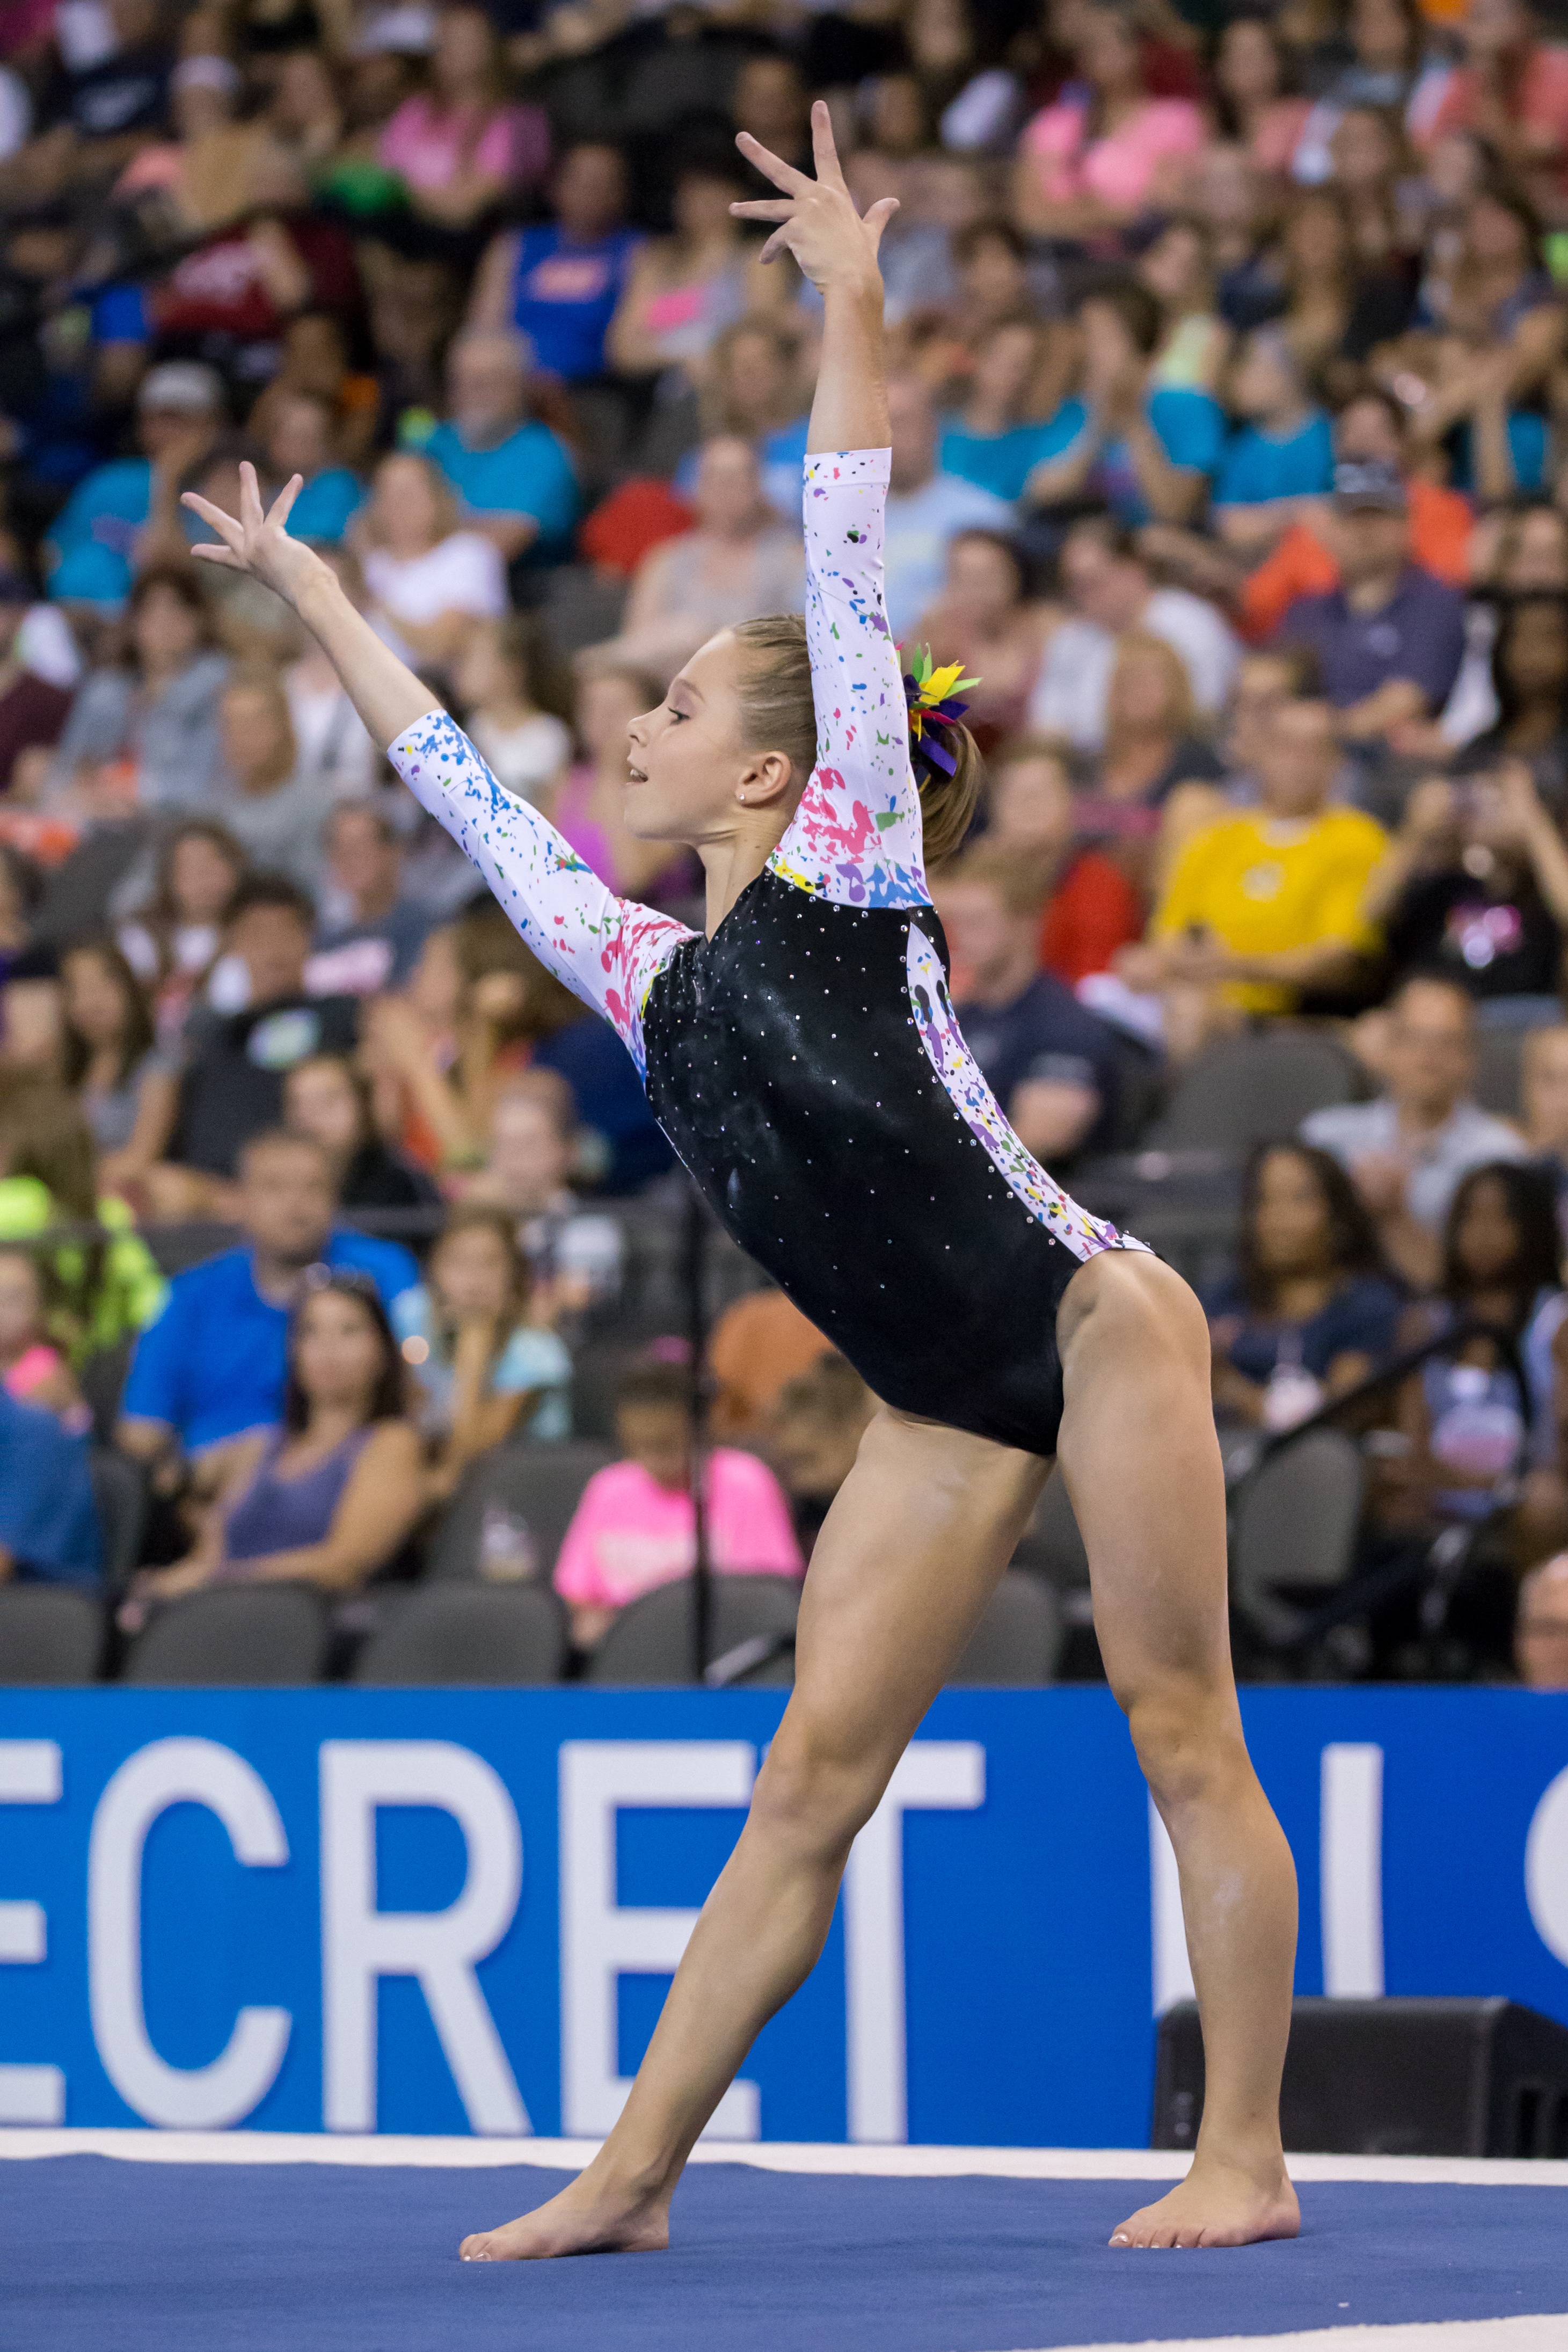 Top 10 Photos From The Juniors Competition - 2015 Secret U.S. Classic2921 x 4381